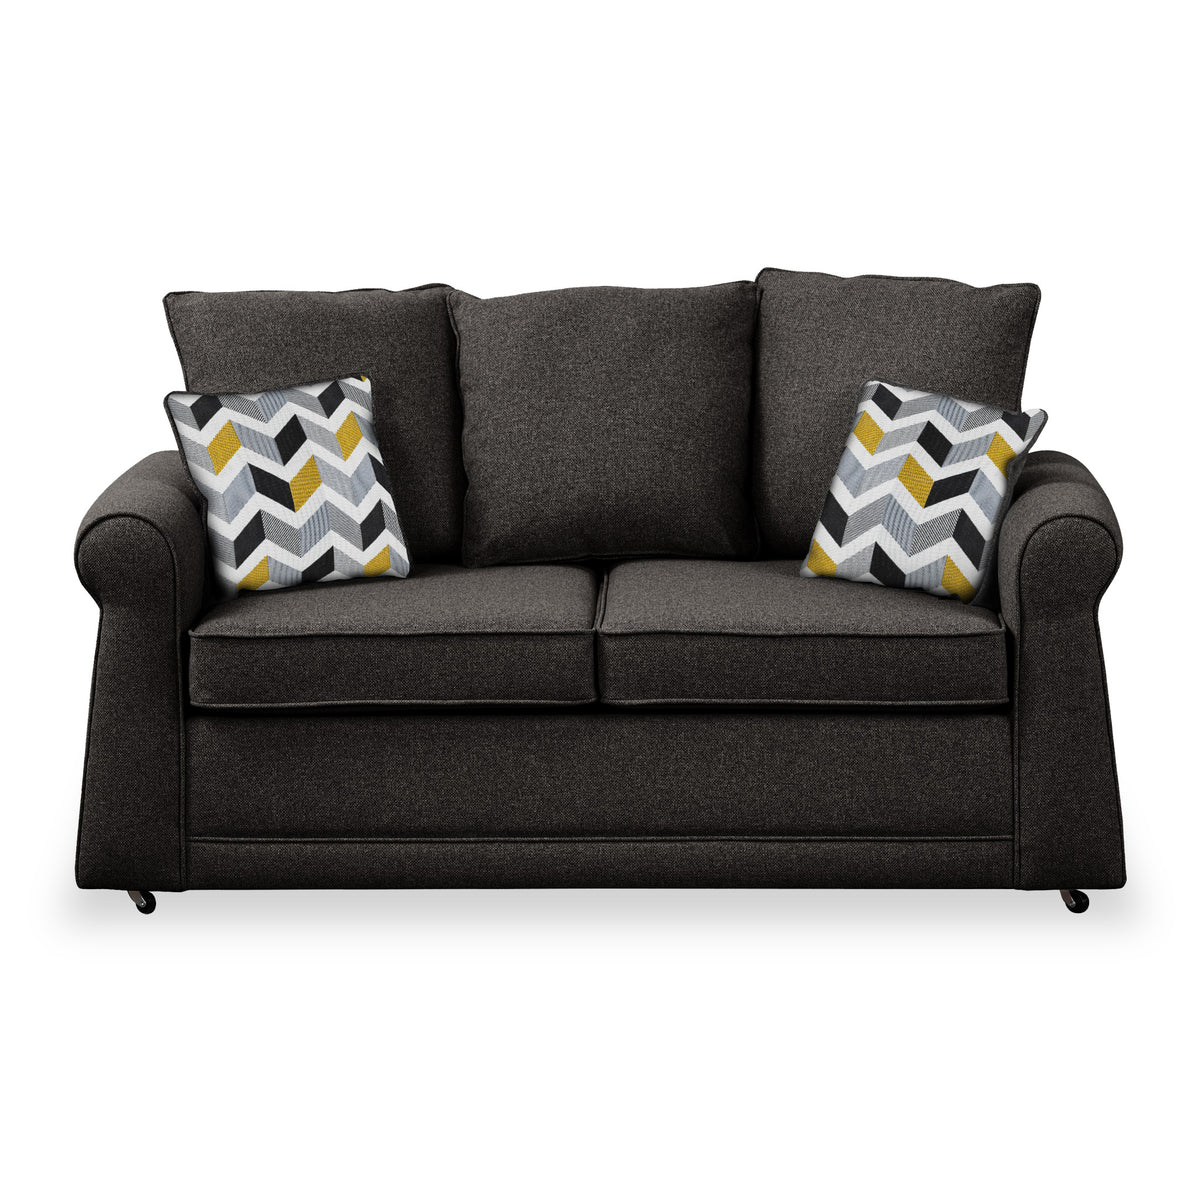 Broughton Faux Linen 2 Seater Sofabed with Mustard Scatter Cushions from Roseland Furniture